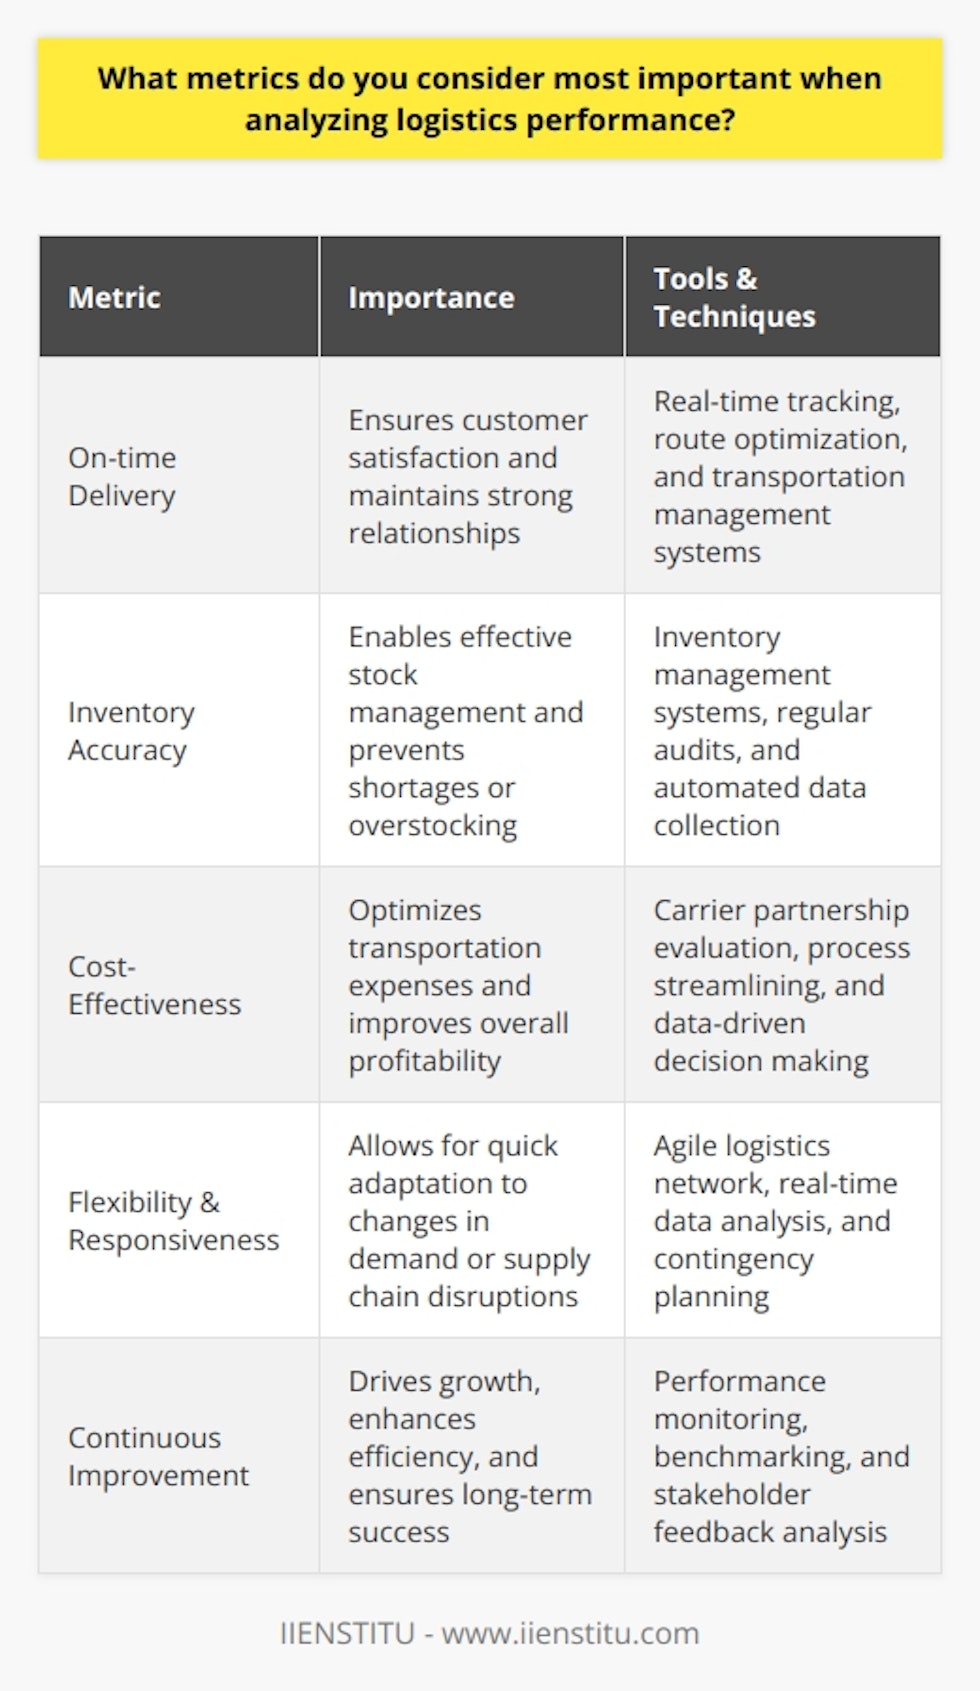 When analyzing logistics performance, I consider several key metrics essential for ensuring efficiency and customer satisfaction. On-time delivery is crucial, as it directly impacts our ability to meet client expectations and maintain strong relationships. Inventory accuracy is another vital metric, enabling us to effectively manage stock levels and avoid shortages or overstocking. Cost-Effectiveness and Flexibility Beyond these fundamental measures, I also focus on cost-effectiveness, striving to optimize routes and minimize transportation expenses. This involves continually evaluating our carrier partnerships and seeking opportunities to streamline processes. Additionally, I prioritize flexibility and responsiveness, as the ability to adapt quickly to changes in demand or supply chain disruptions is essential in todays fast-paced business environment. Leveraging Technology for Insights To gain deeper insights into our logistics performance, I leverage advanced technologies such as transportation management systems and real-time tracking. These tools provide valuable data on transit times, route optimization, and potential bottlenecks, allowing us to make informed decisions and drive continuous improvement. By combining quantitative metrics with qualitative feedback from customers and internal stakeholders, I aim to develop a comprehensive view of our logistics operations and identify areas for growth and enhancement. Ultimately, my approach to analyzing logistics performance is centered on delivering exceptional value to our customers while optimizing efficiency and cost-effectiveness. By continuously monitoring and refining these critical metrics, we can build a resilient and agile logistics network that supports our organizations overall success.